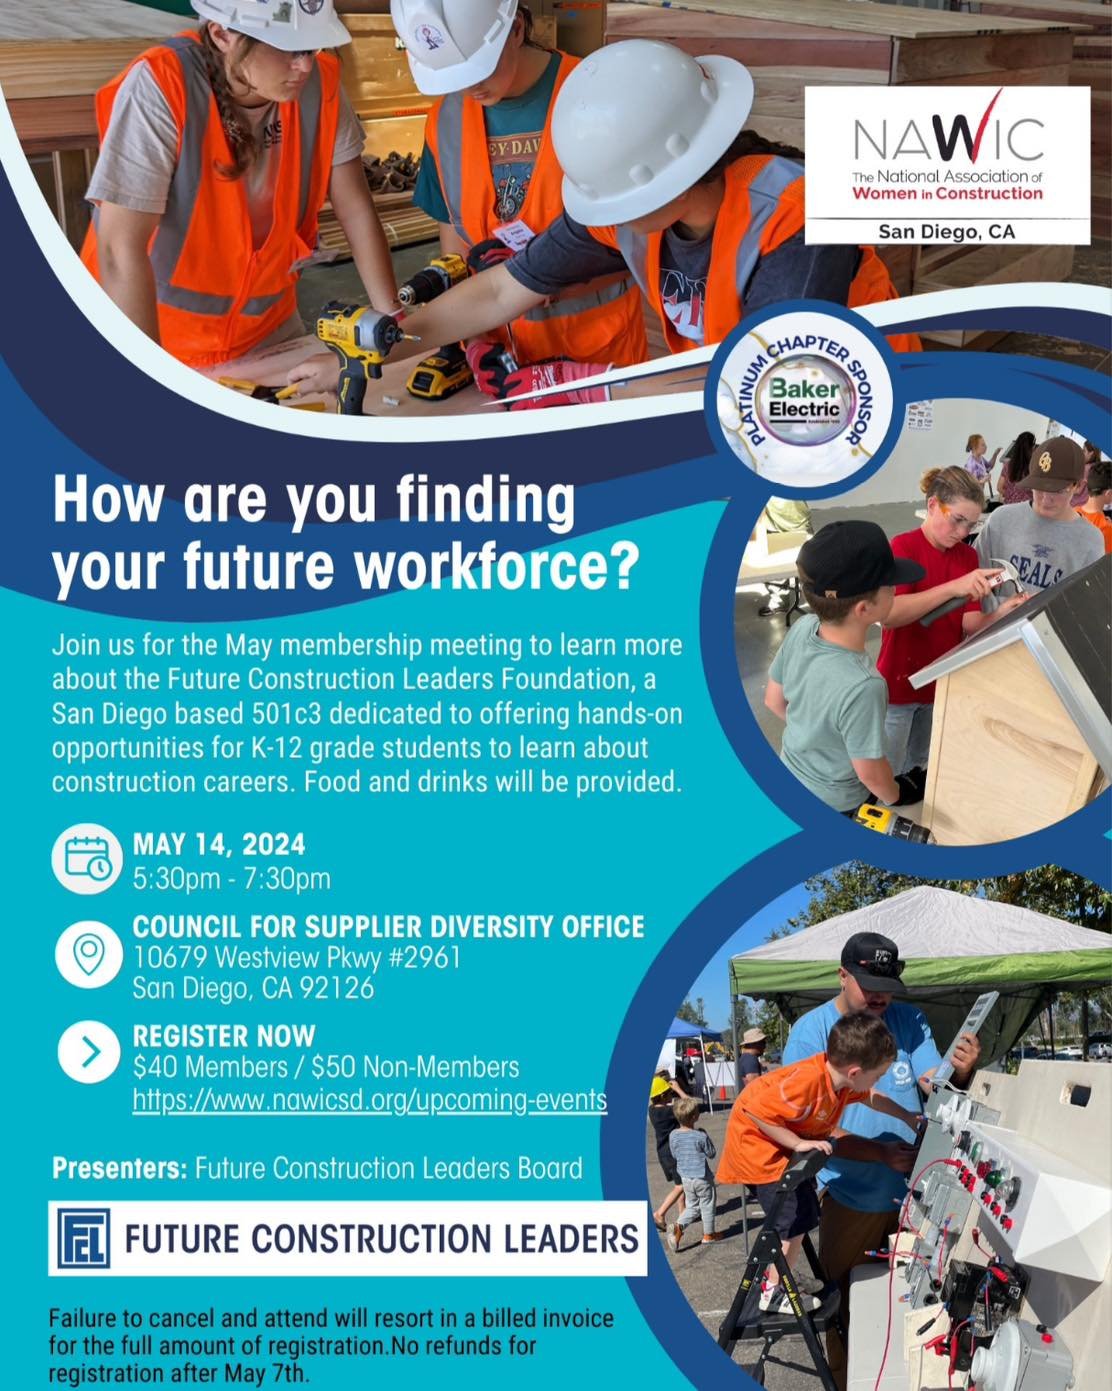 Please join us on Tuesday, May 1️⃣4️⃣, as we learn about the Future Construction Leaders, a San Diego based 501c3, dedicated to offering hands-on opportunities for K-12 grade students to learn about construction careers. Location will be at the Counc